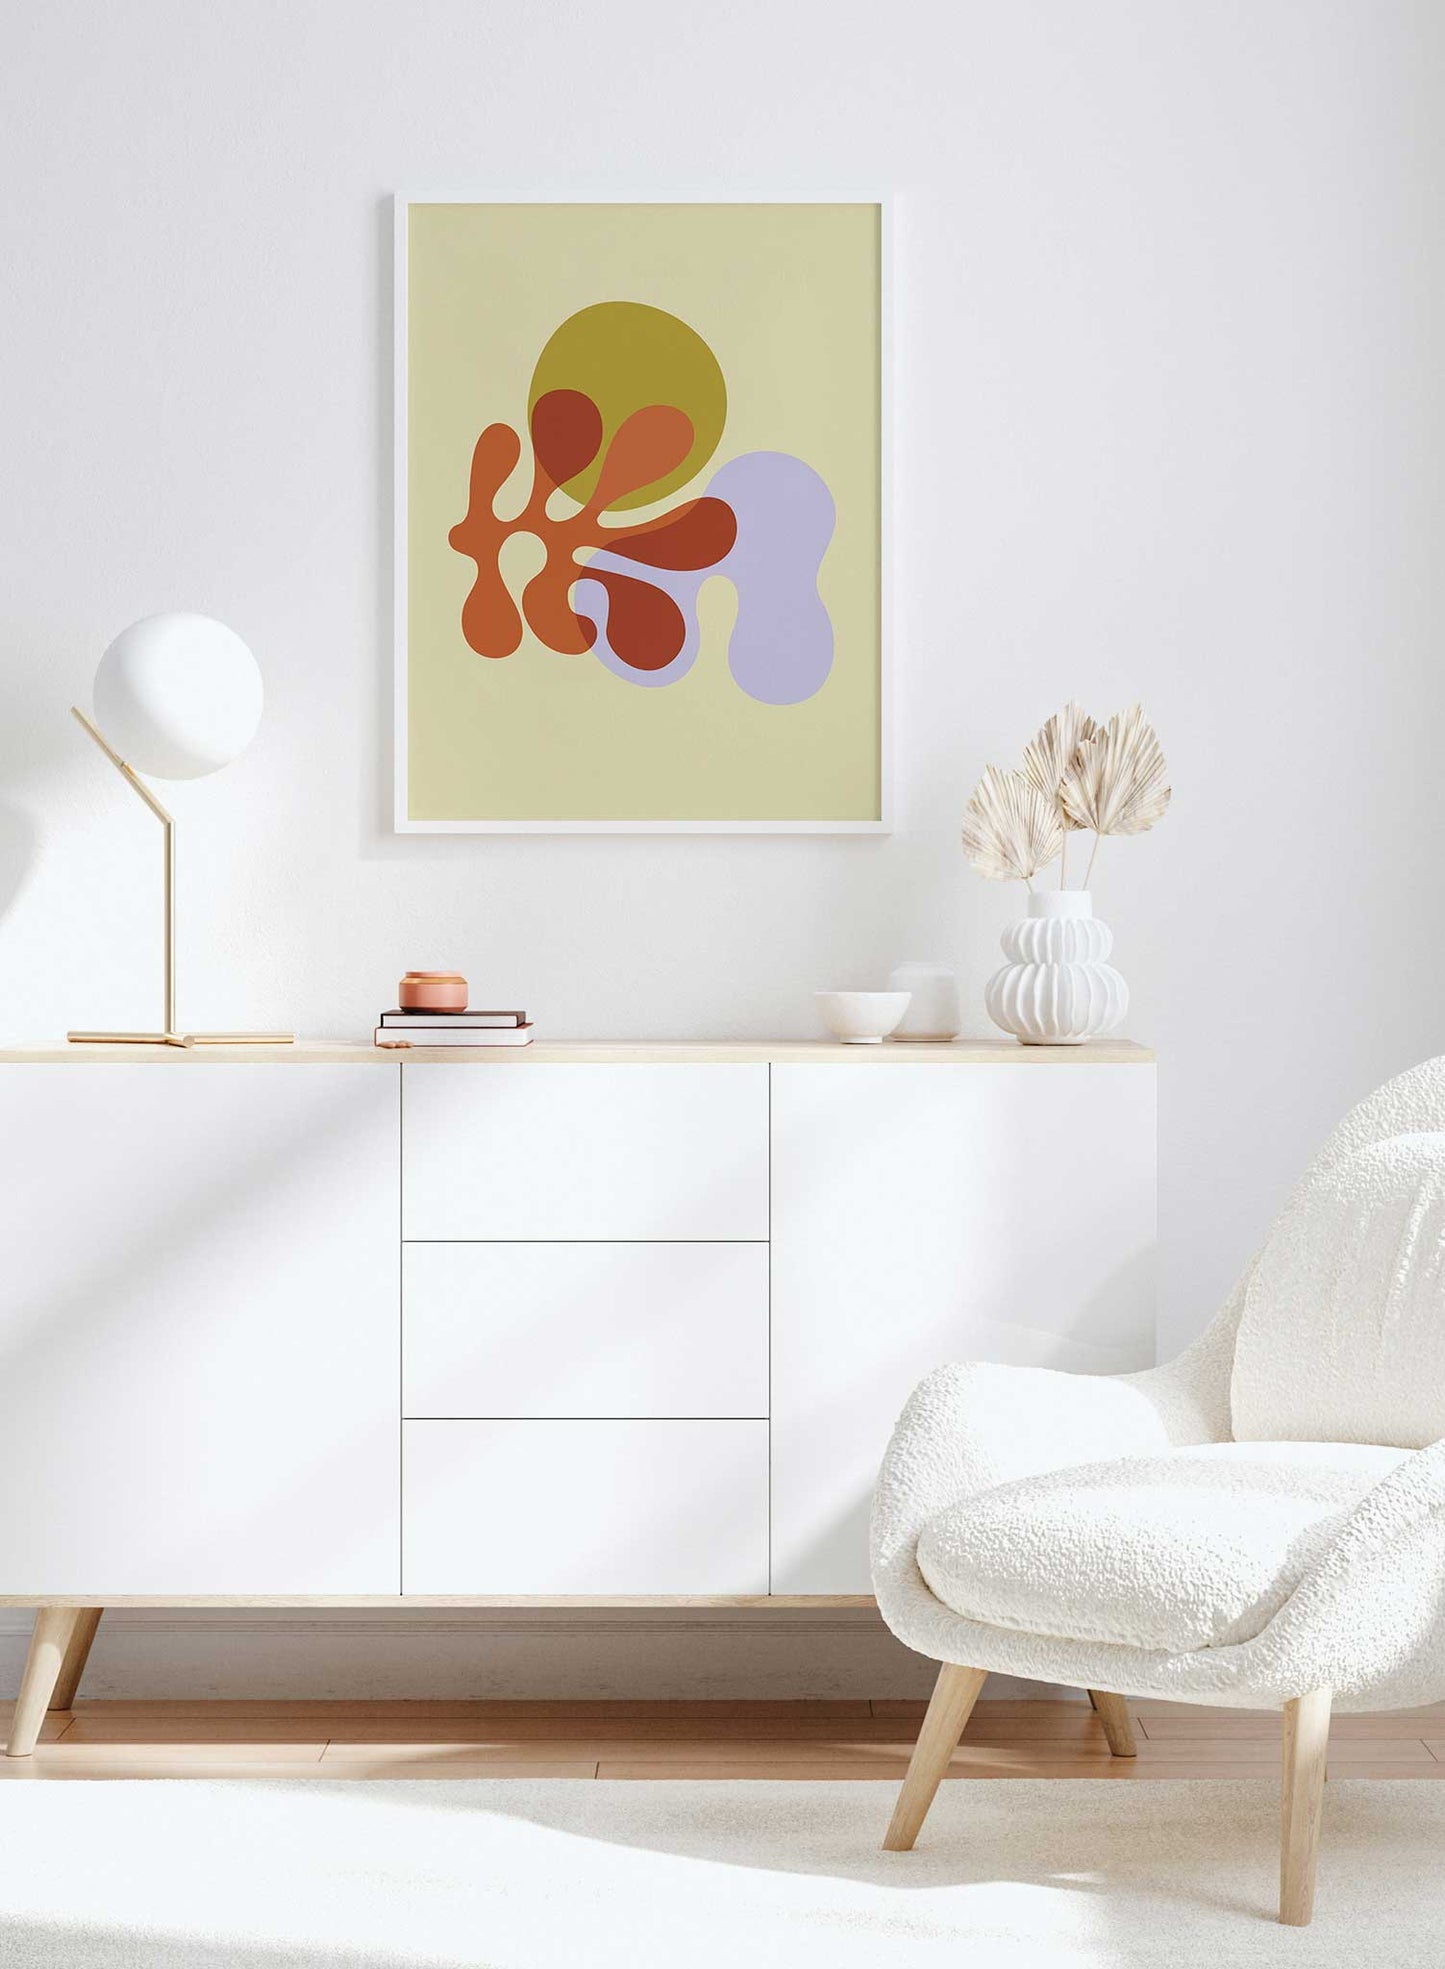 Vibrant Superimposition is a minimalist illustration poster of layered retro shapes by Opposite Wall.